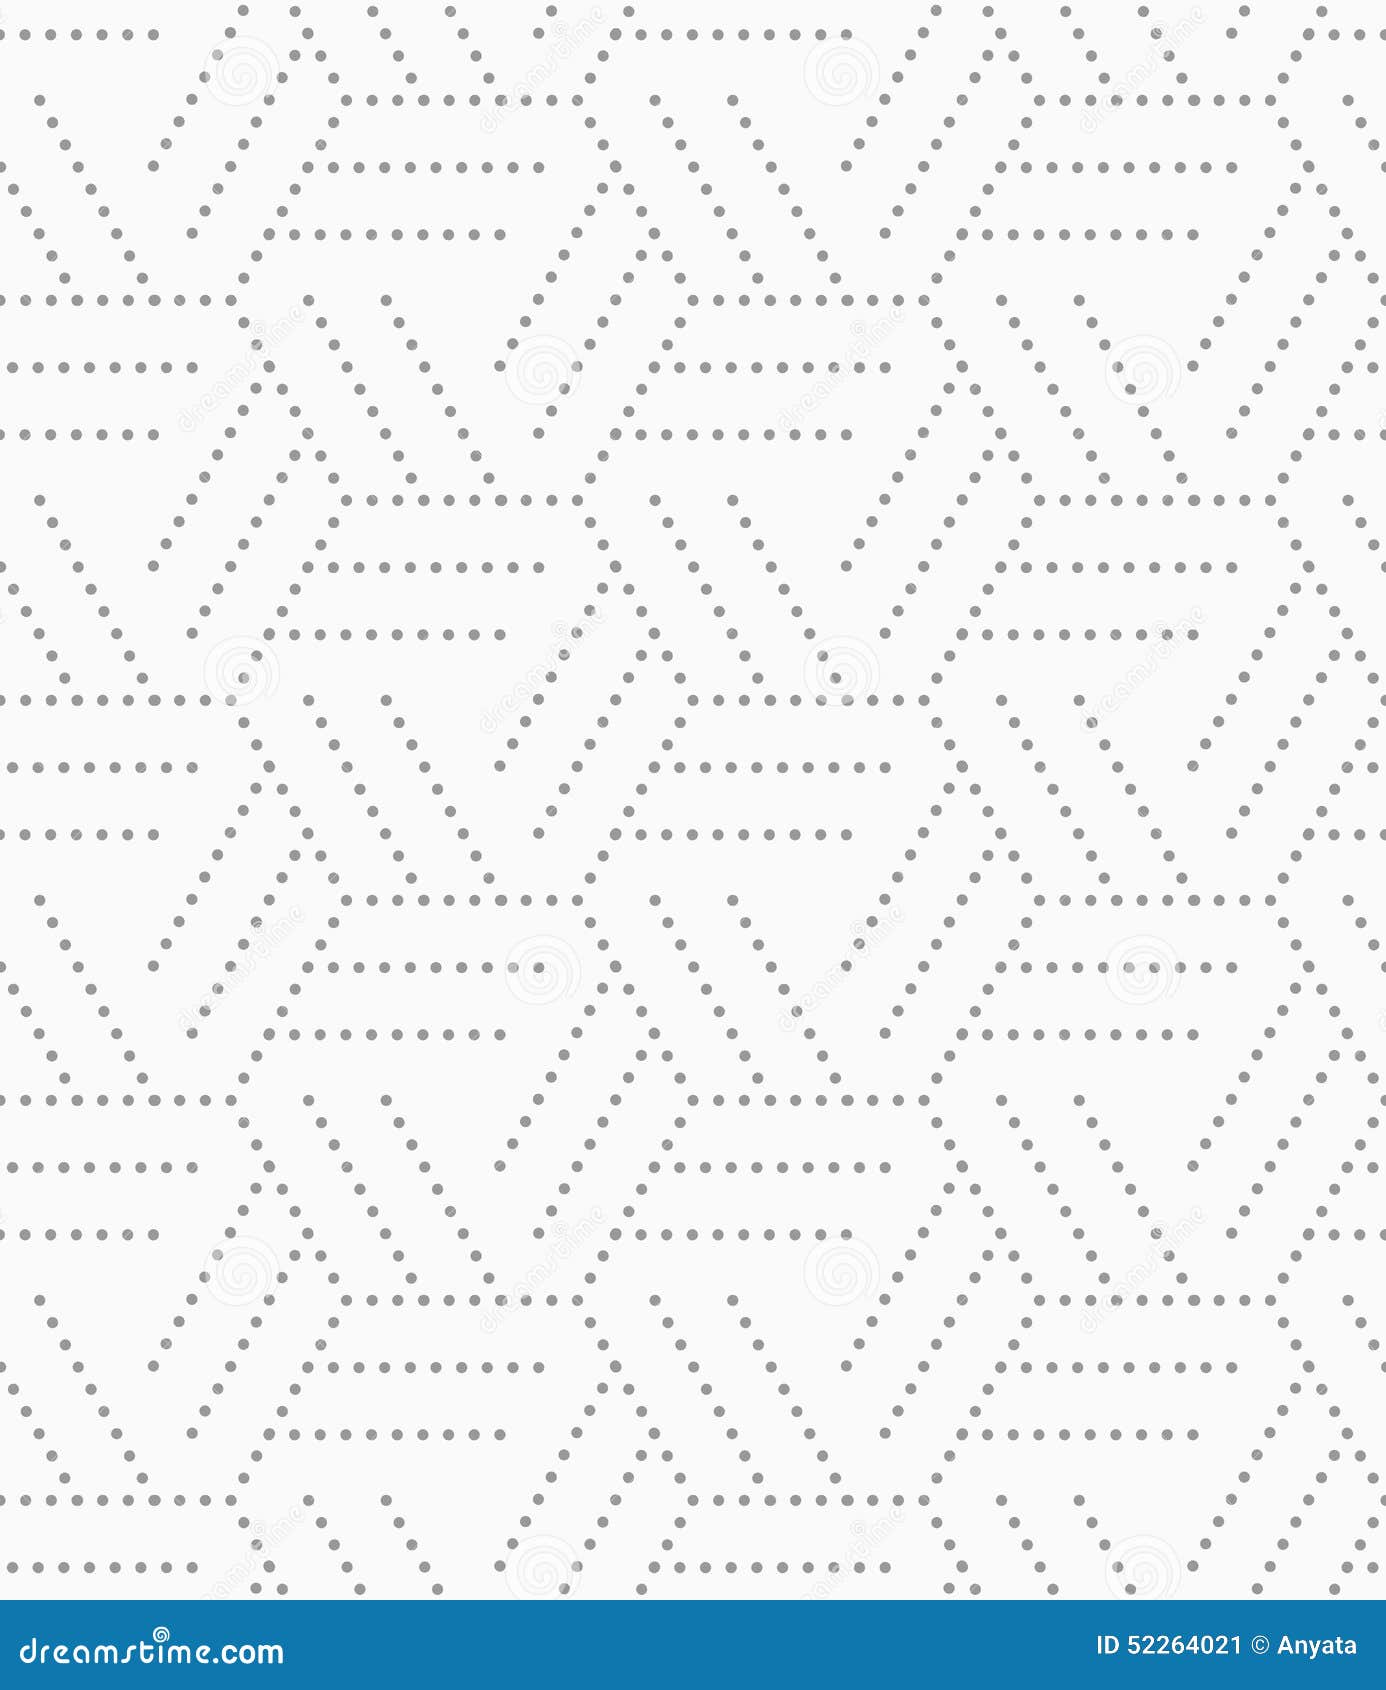 Gray dotted hexagons grid stock vector. Illustration of grid - 52264021